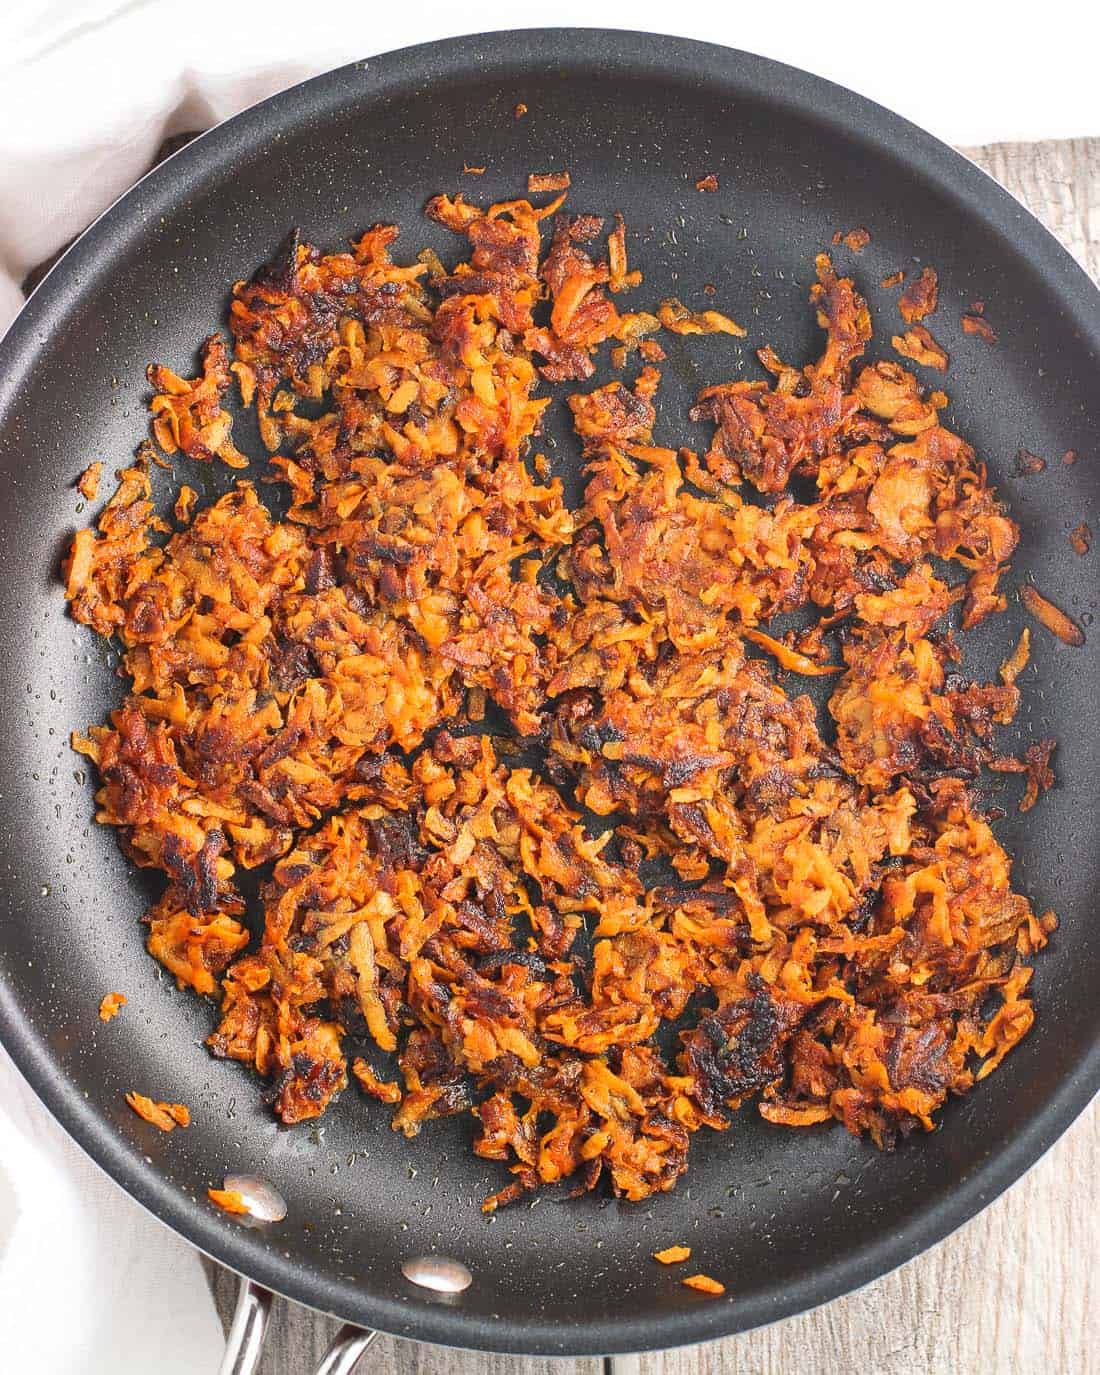 Shredded sweet potato hash browns cooked in a skillet.